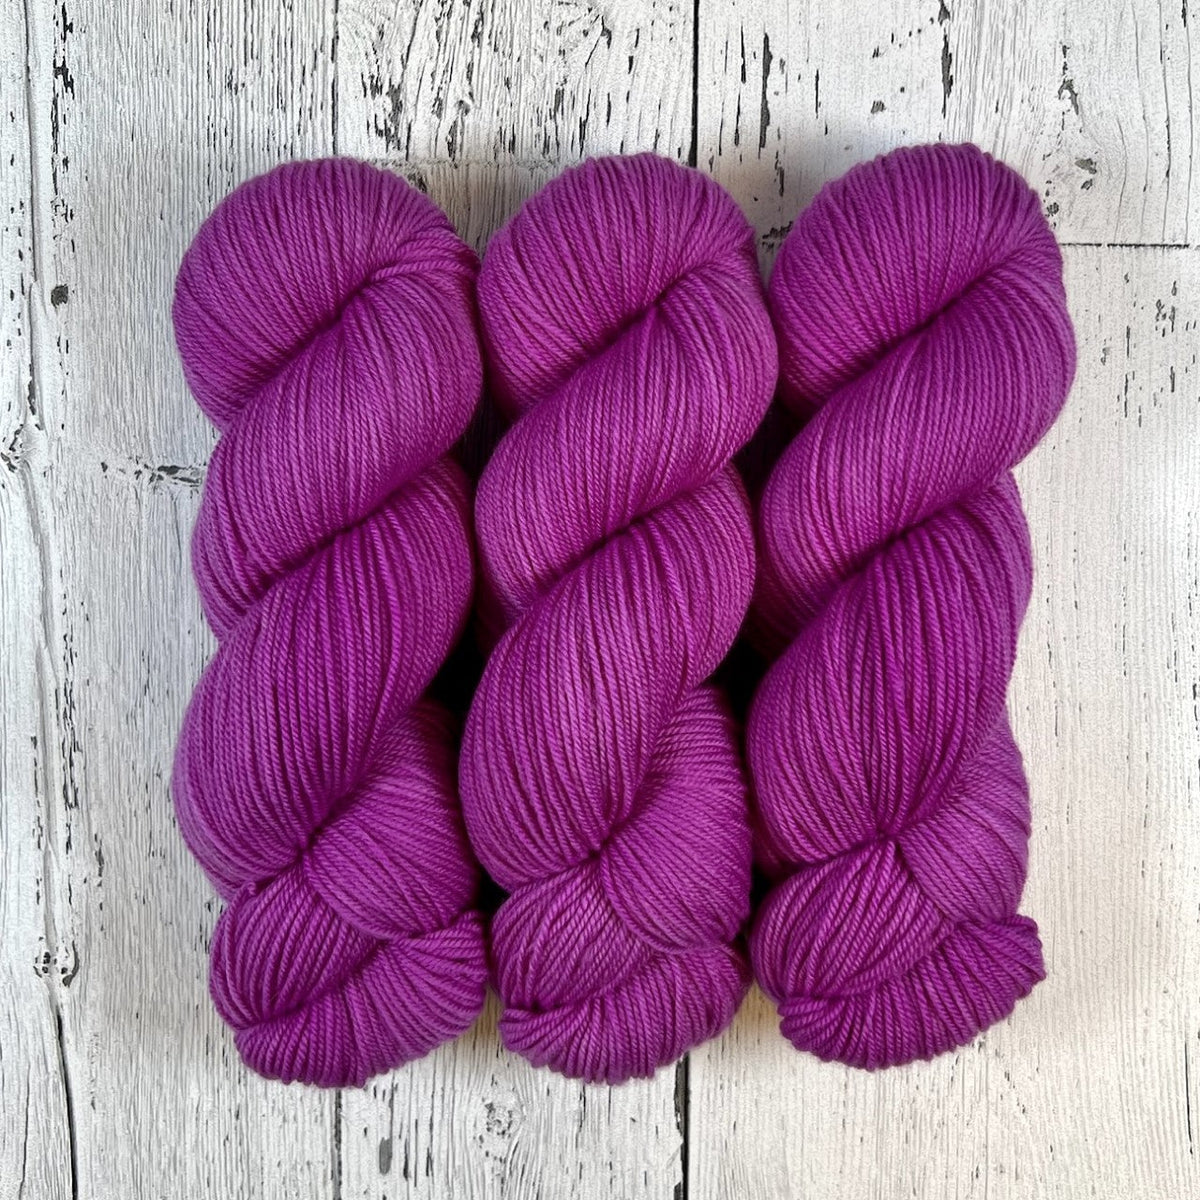 Clematis - Revival Fingering - Dyed Stock